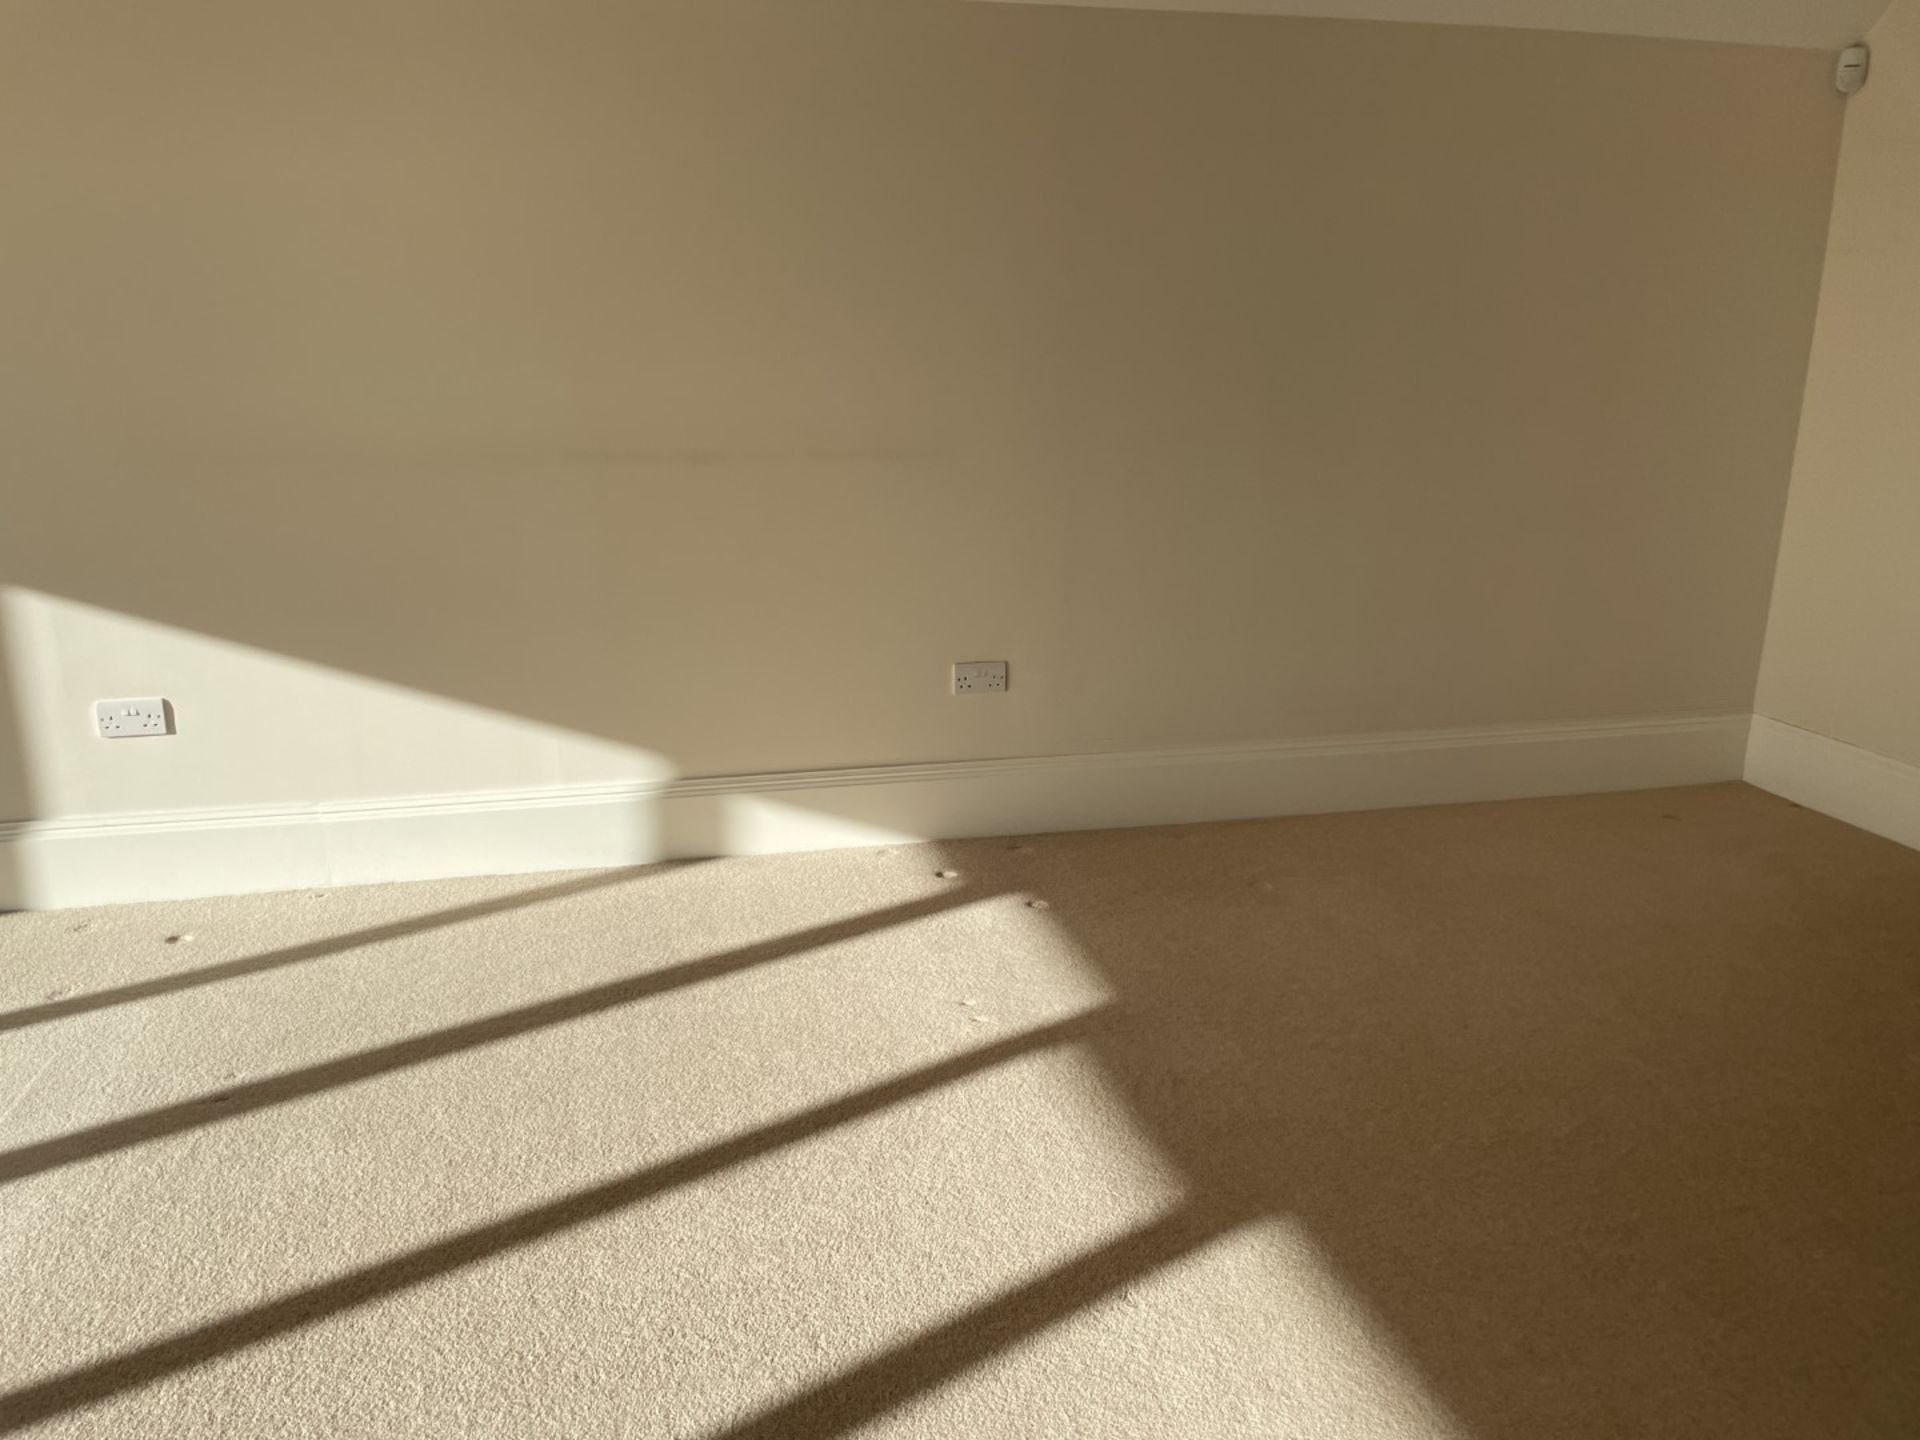 1 x Approximately 22-Metres of Painted Timber Wooden Skirting Boards, In White - Ref: PAN224 - CL896 - Image 8 of 10